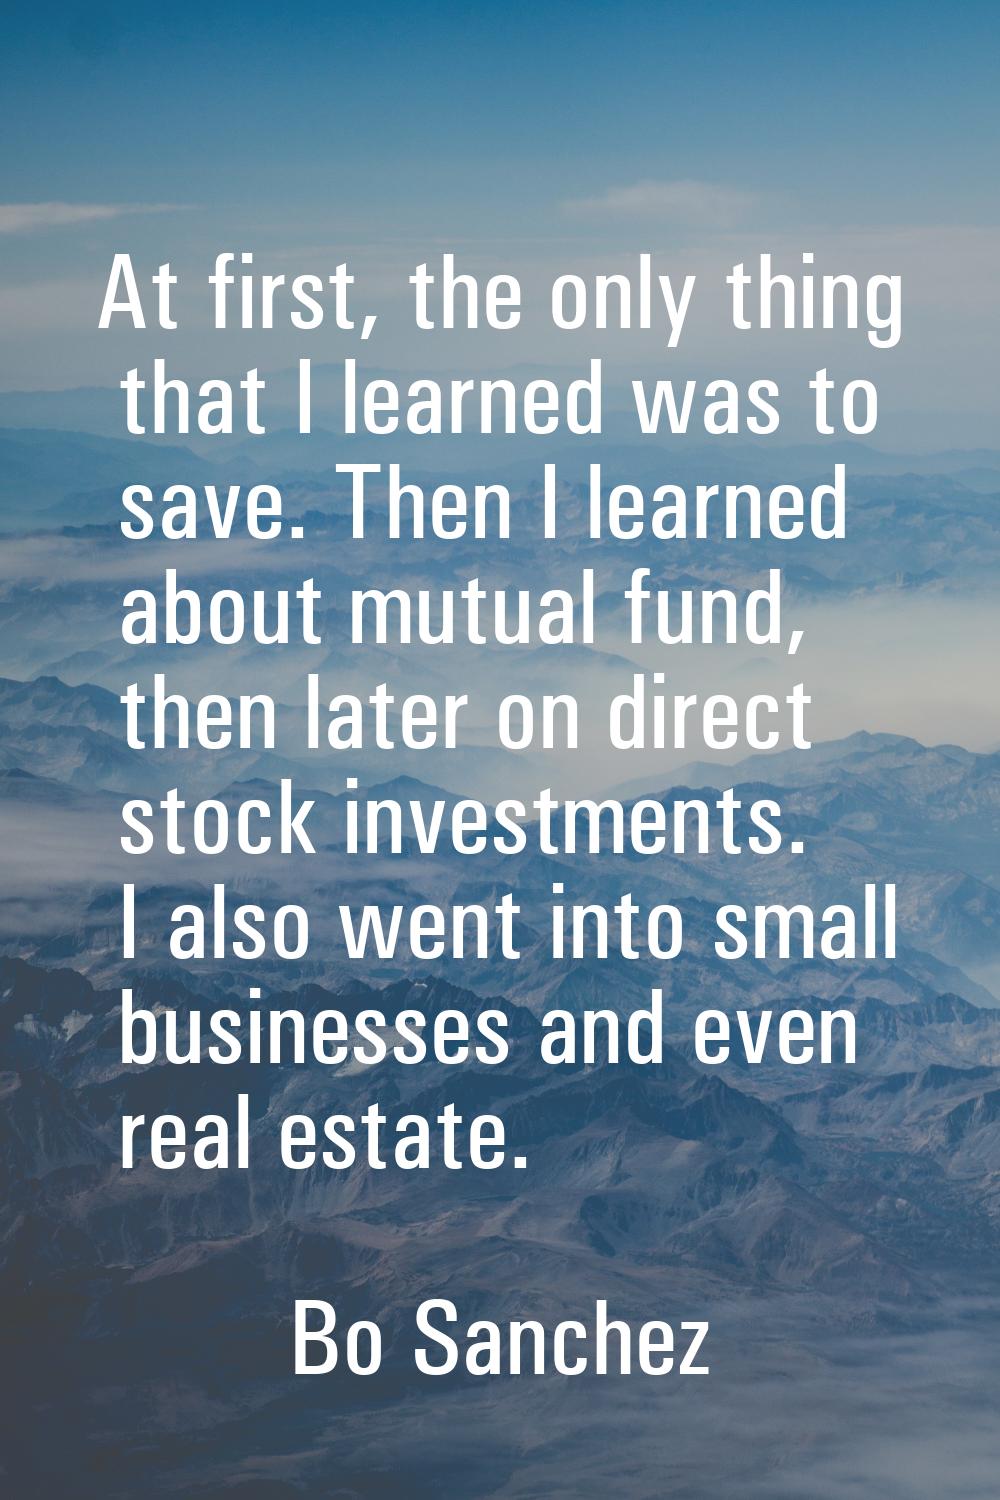 At first, the only thing that I learned was to save. Then I learned about mutual fund, then later o